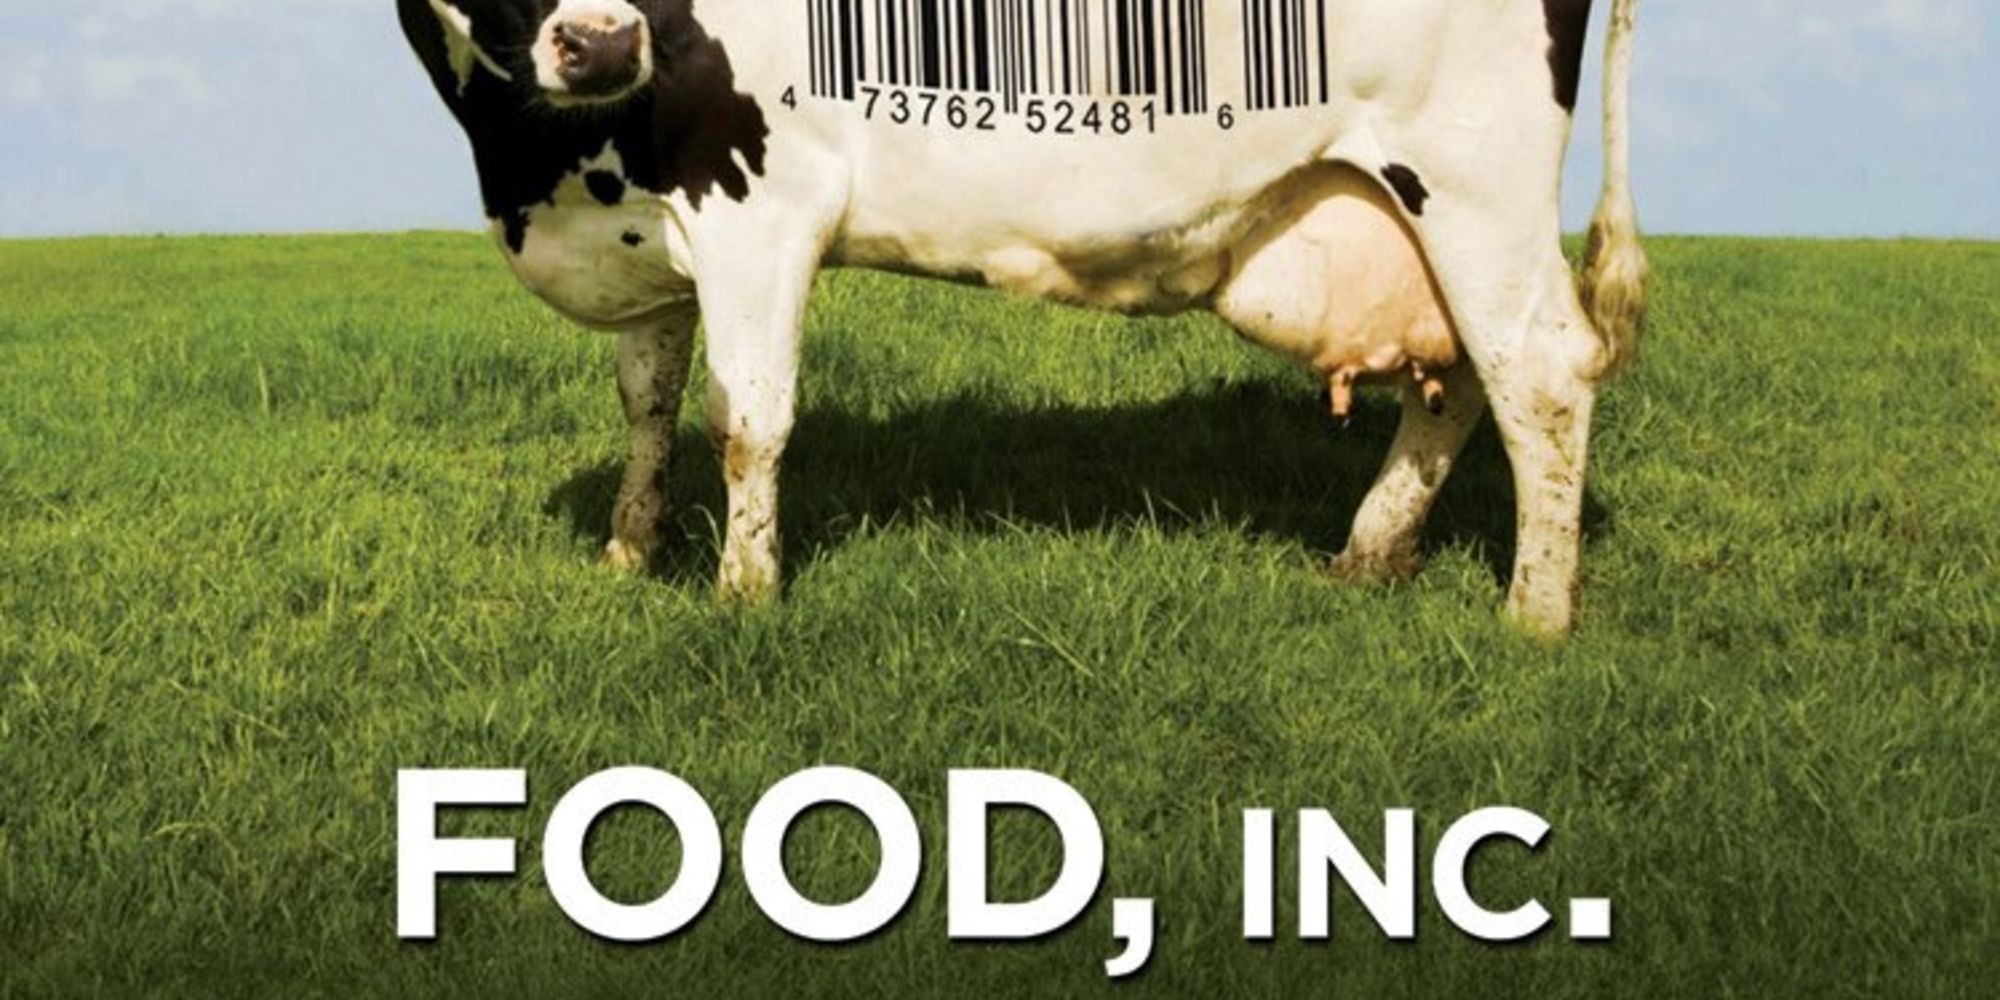 Cow with a bar code for a logo